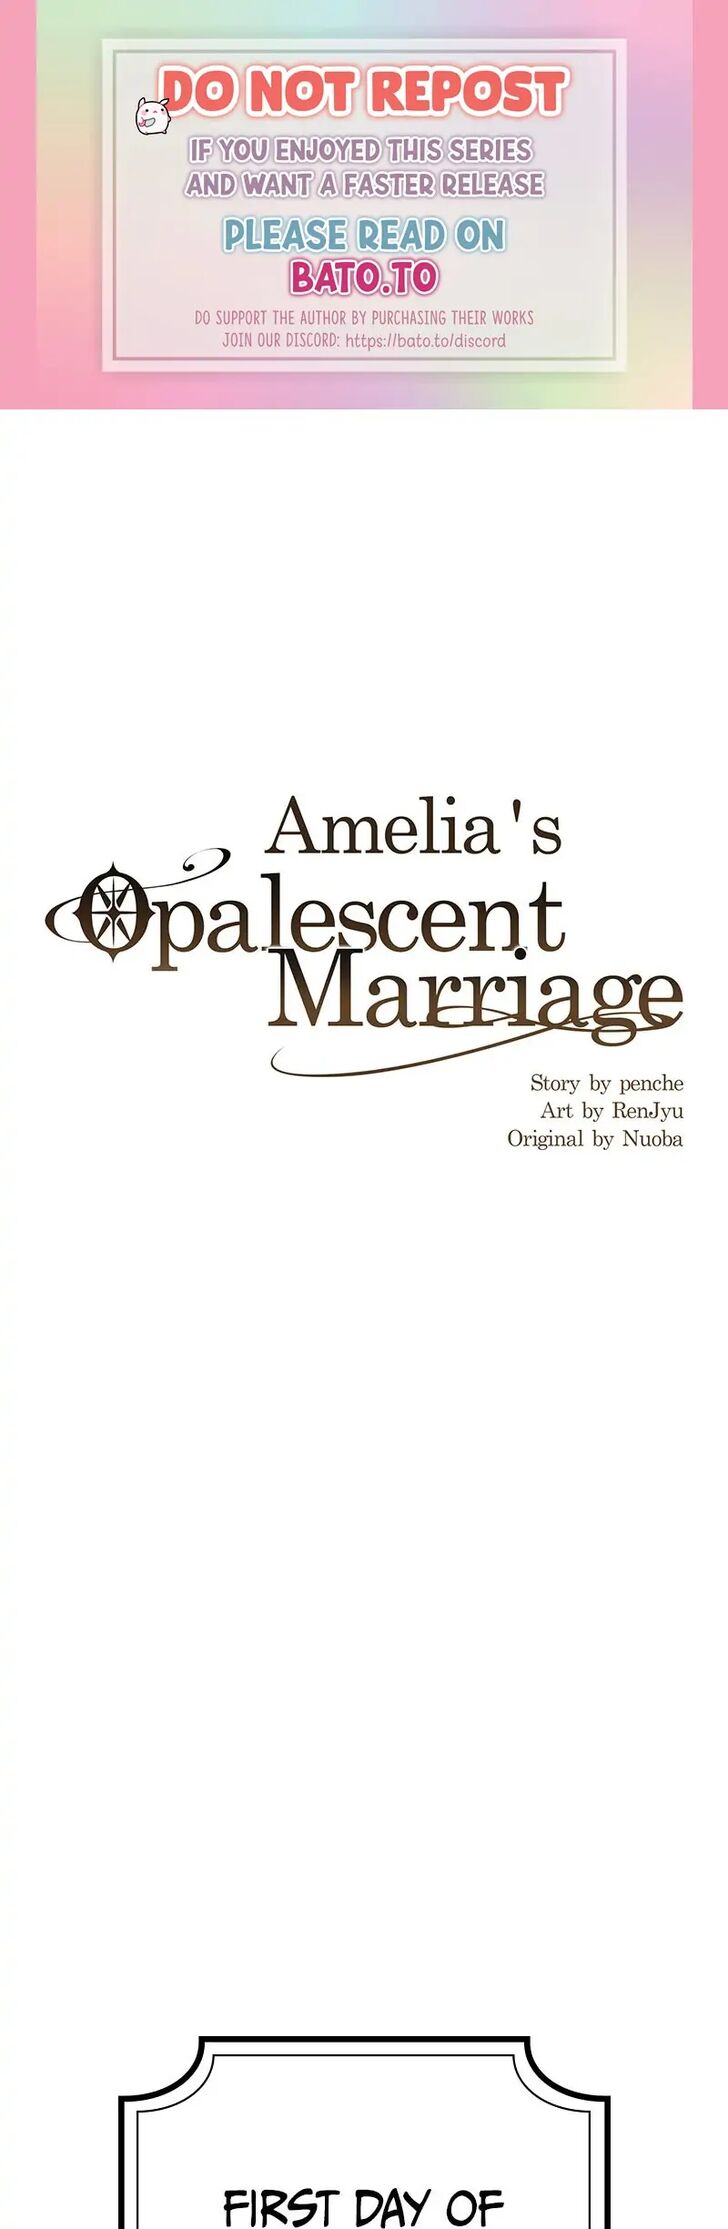 Amelia's Opalescent Marriage Amelia's Opalescent Marriage Ch.025